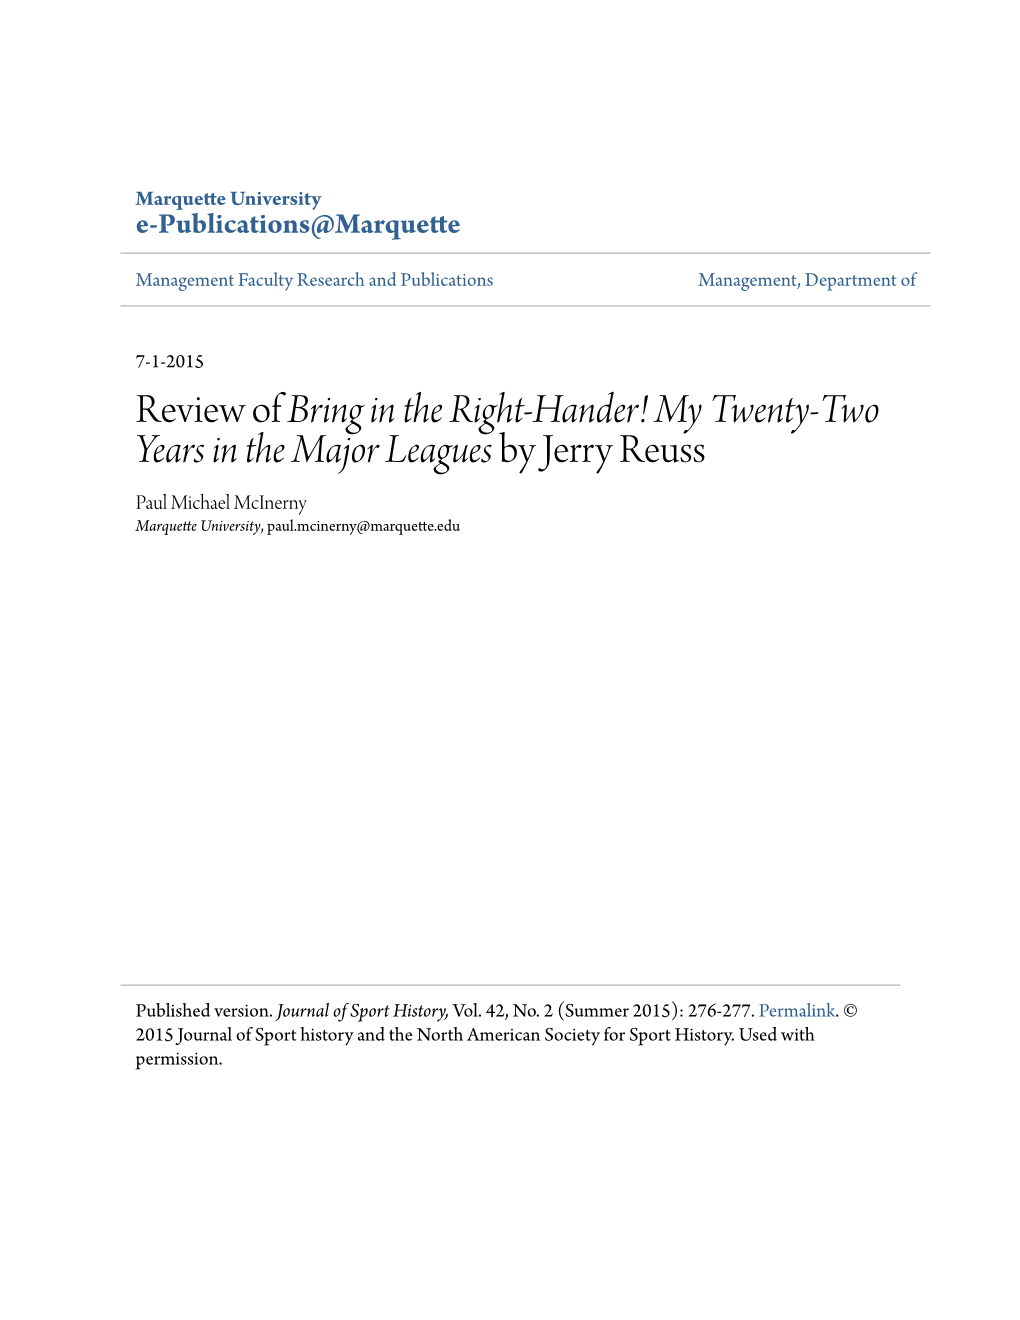 Review of Bring in the Right-Hander! My Twenty-Two Years in the Major Leagues by Jerry Reuss Paul Michael Mcinerny Marquette University, Paul.Mcinerny@Marquette.Edu